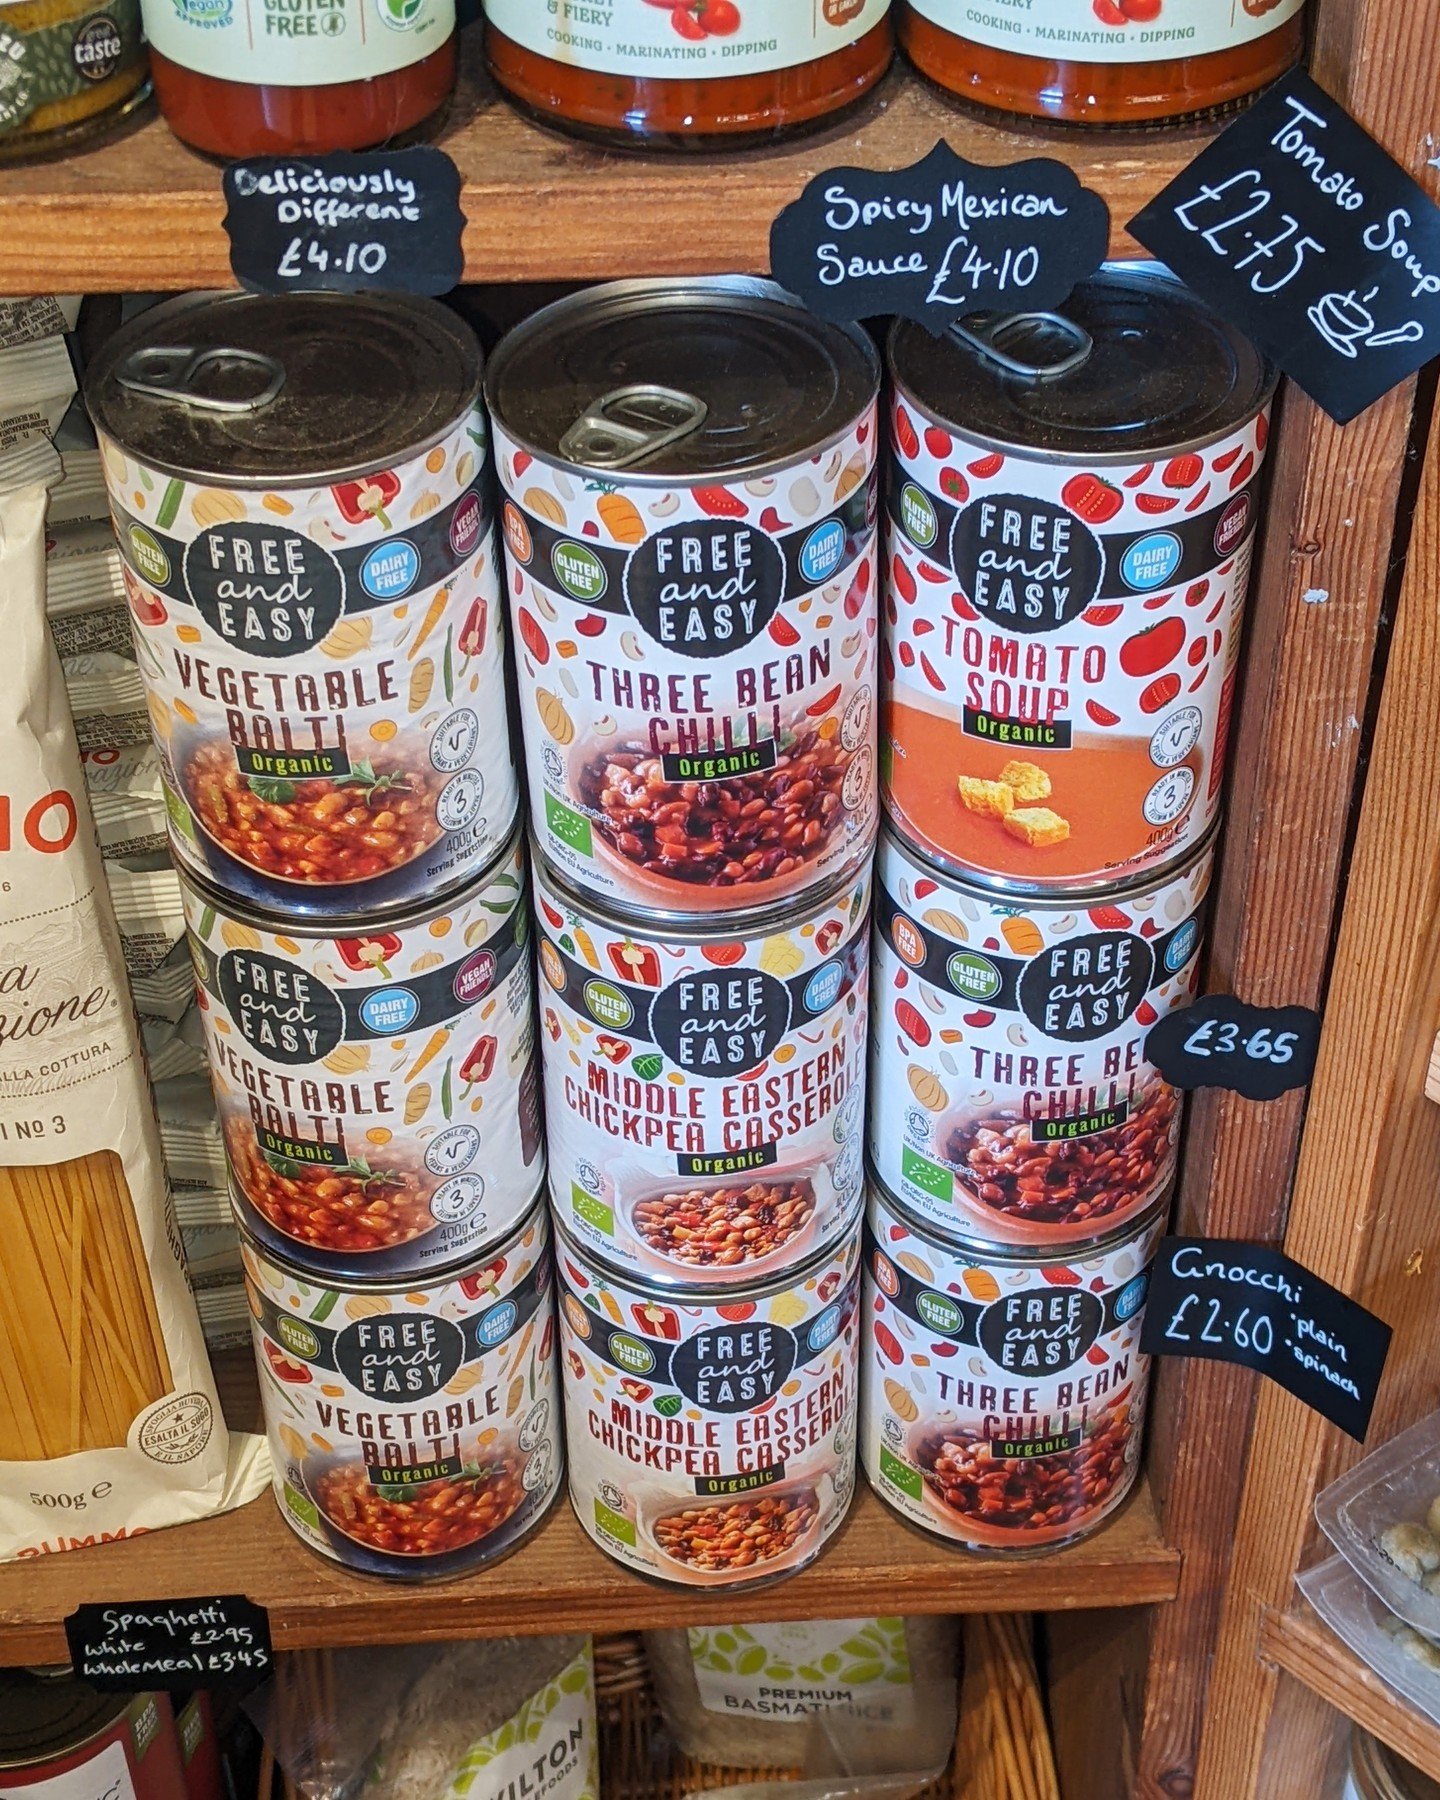 Spotted in @village_larder!

A fantastic selection of ready meals, kept in good company with a classic tomato soup 🍅